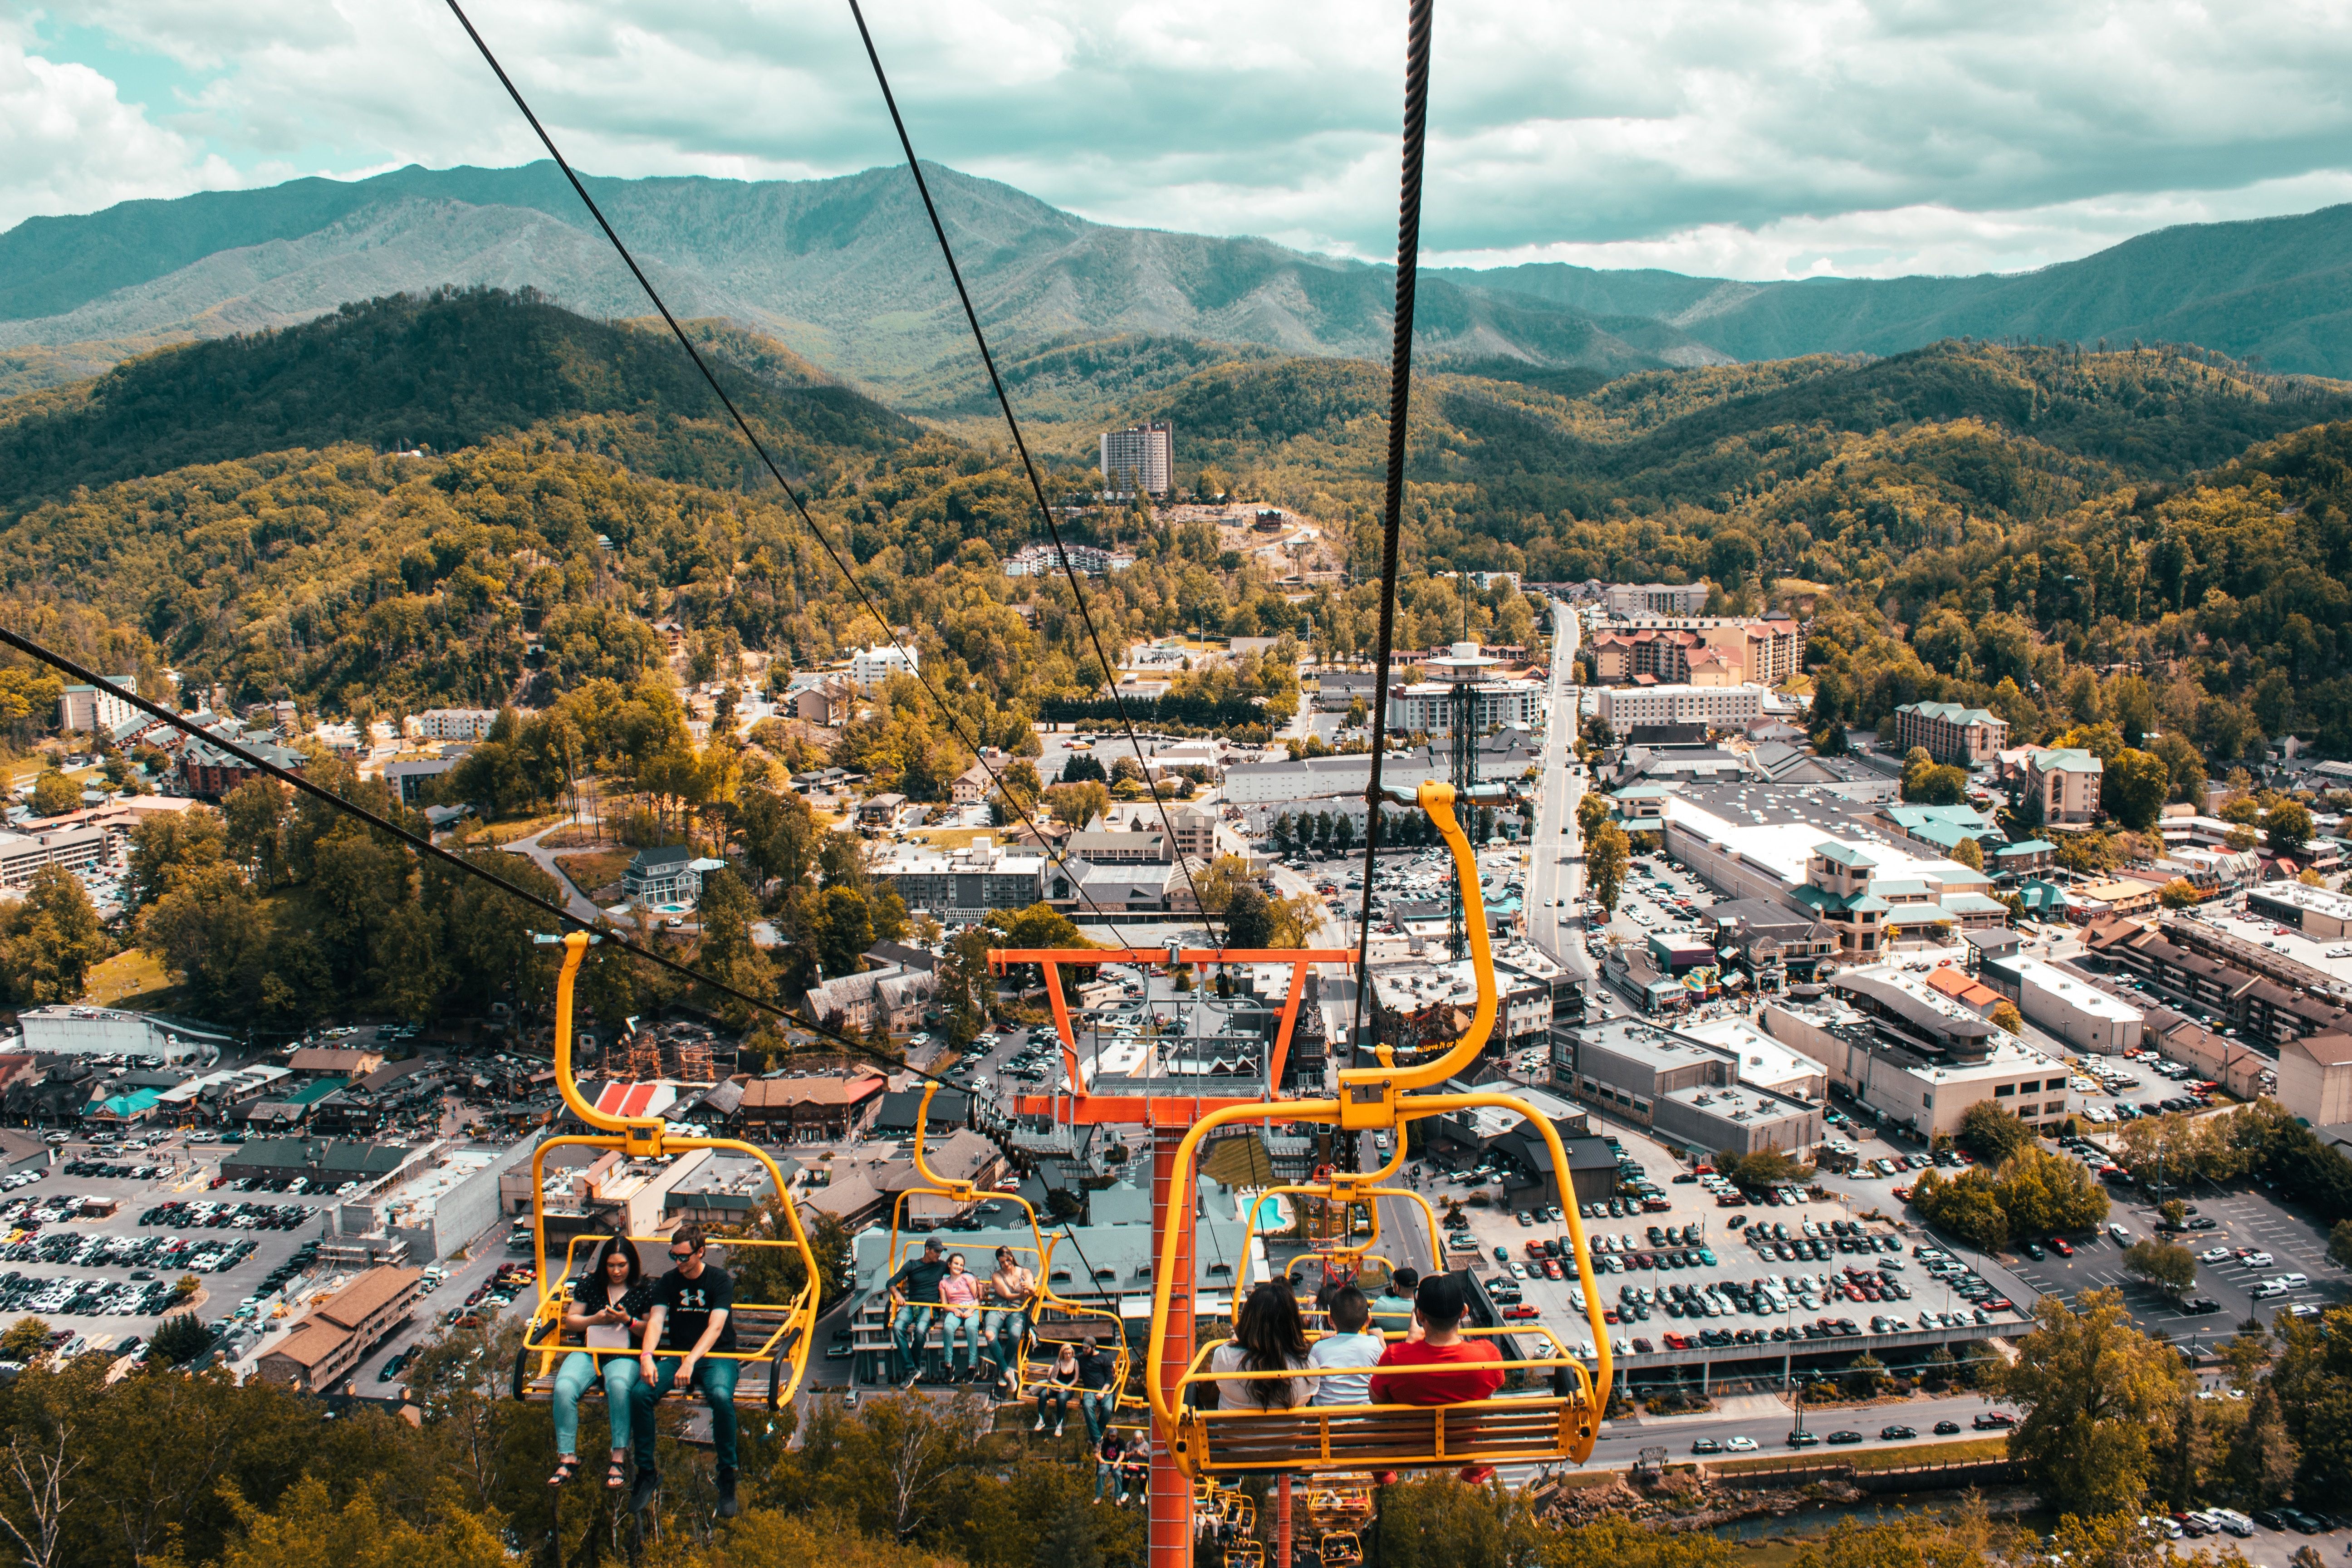 People riding cable cars in Pigeon Forge to see fall foliage from a different point in Tennessee, United States